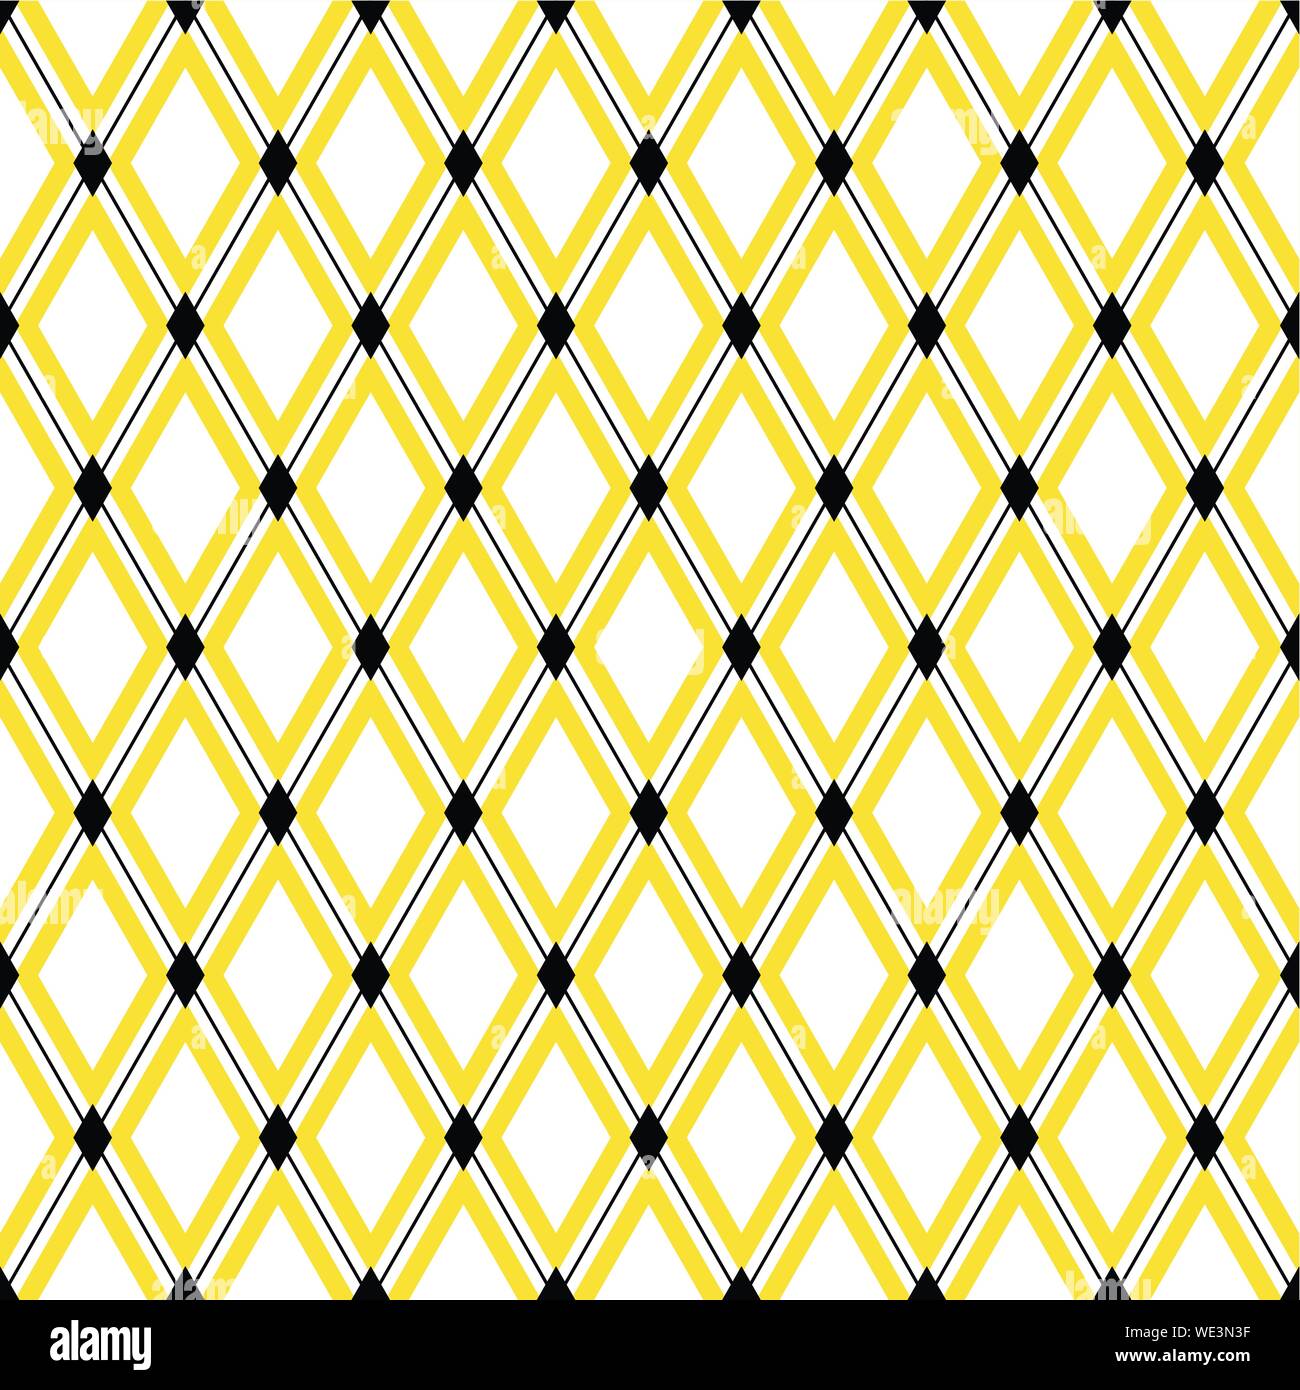 Seamless geometric hipster pattern. Endless cross lines, rhombus vector background for wallpaper, fashion print design Stock Vector